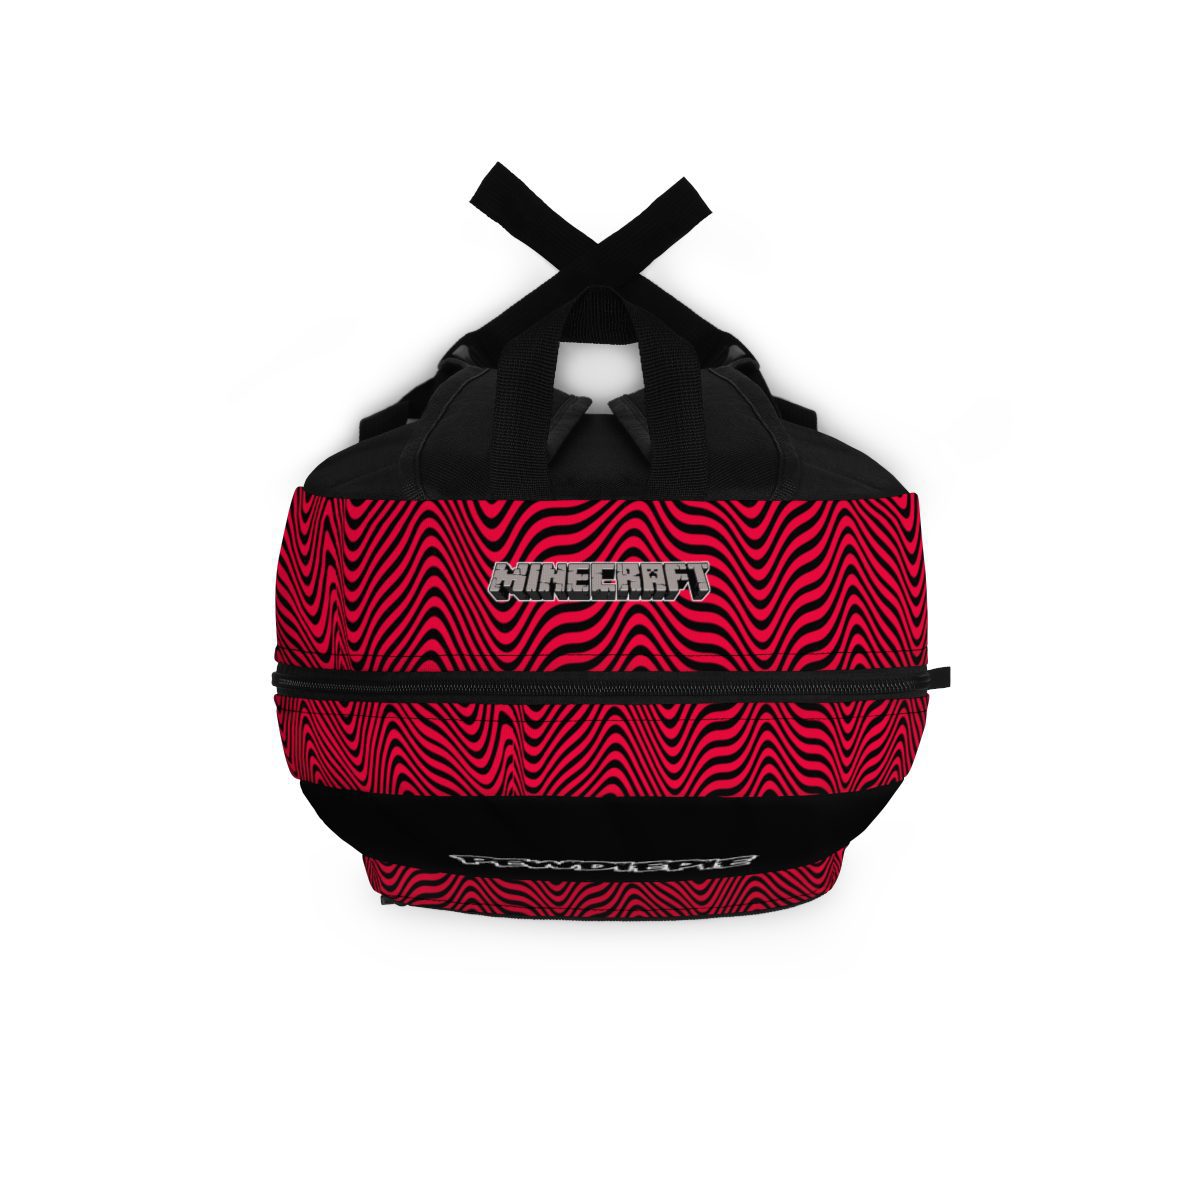 Minecraft Pewdiepie Logo and Symbol Black and Red Backpack Cool Kiddo 16